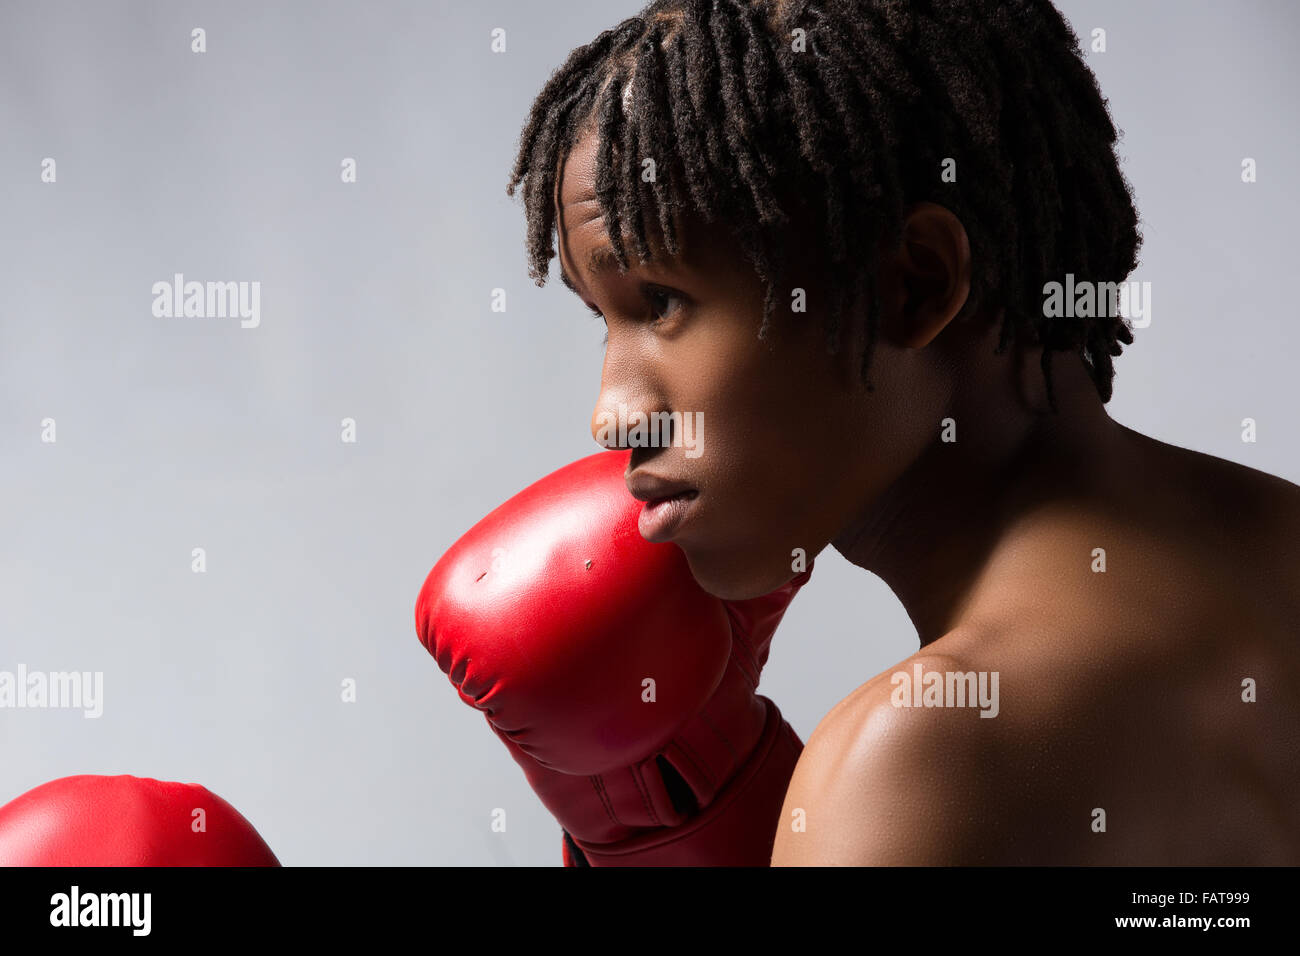 Young muscular athletic male boxer wearing blue boxing shorts and